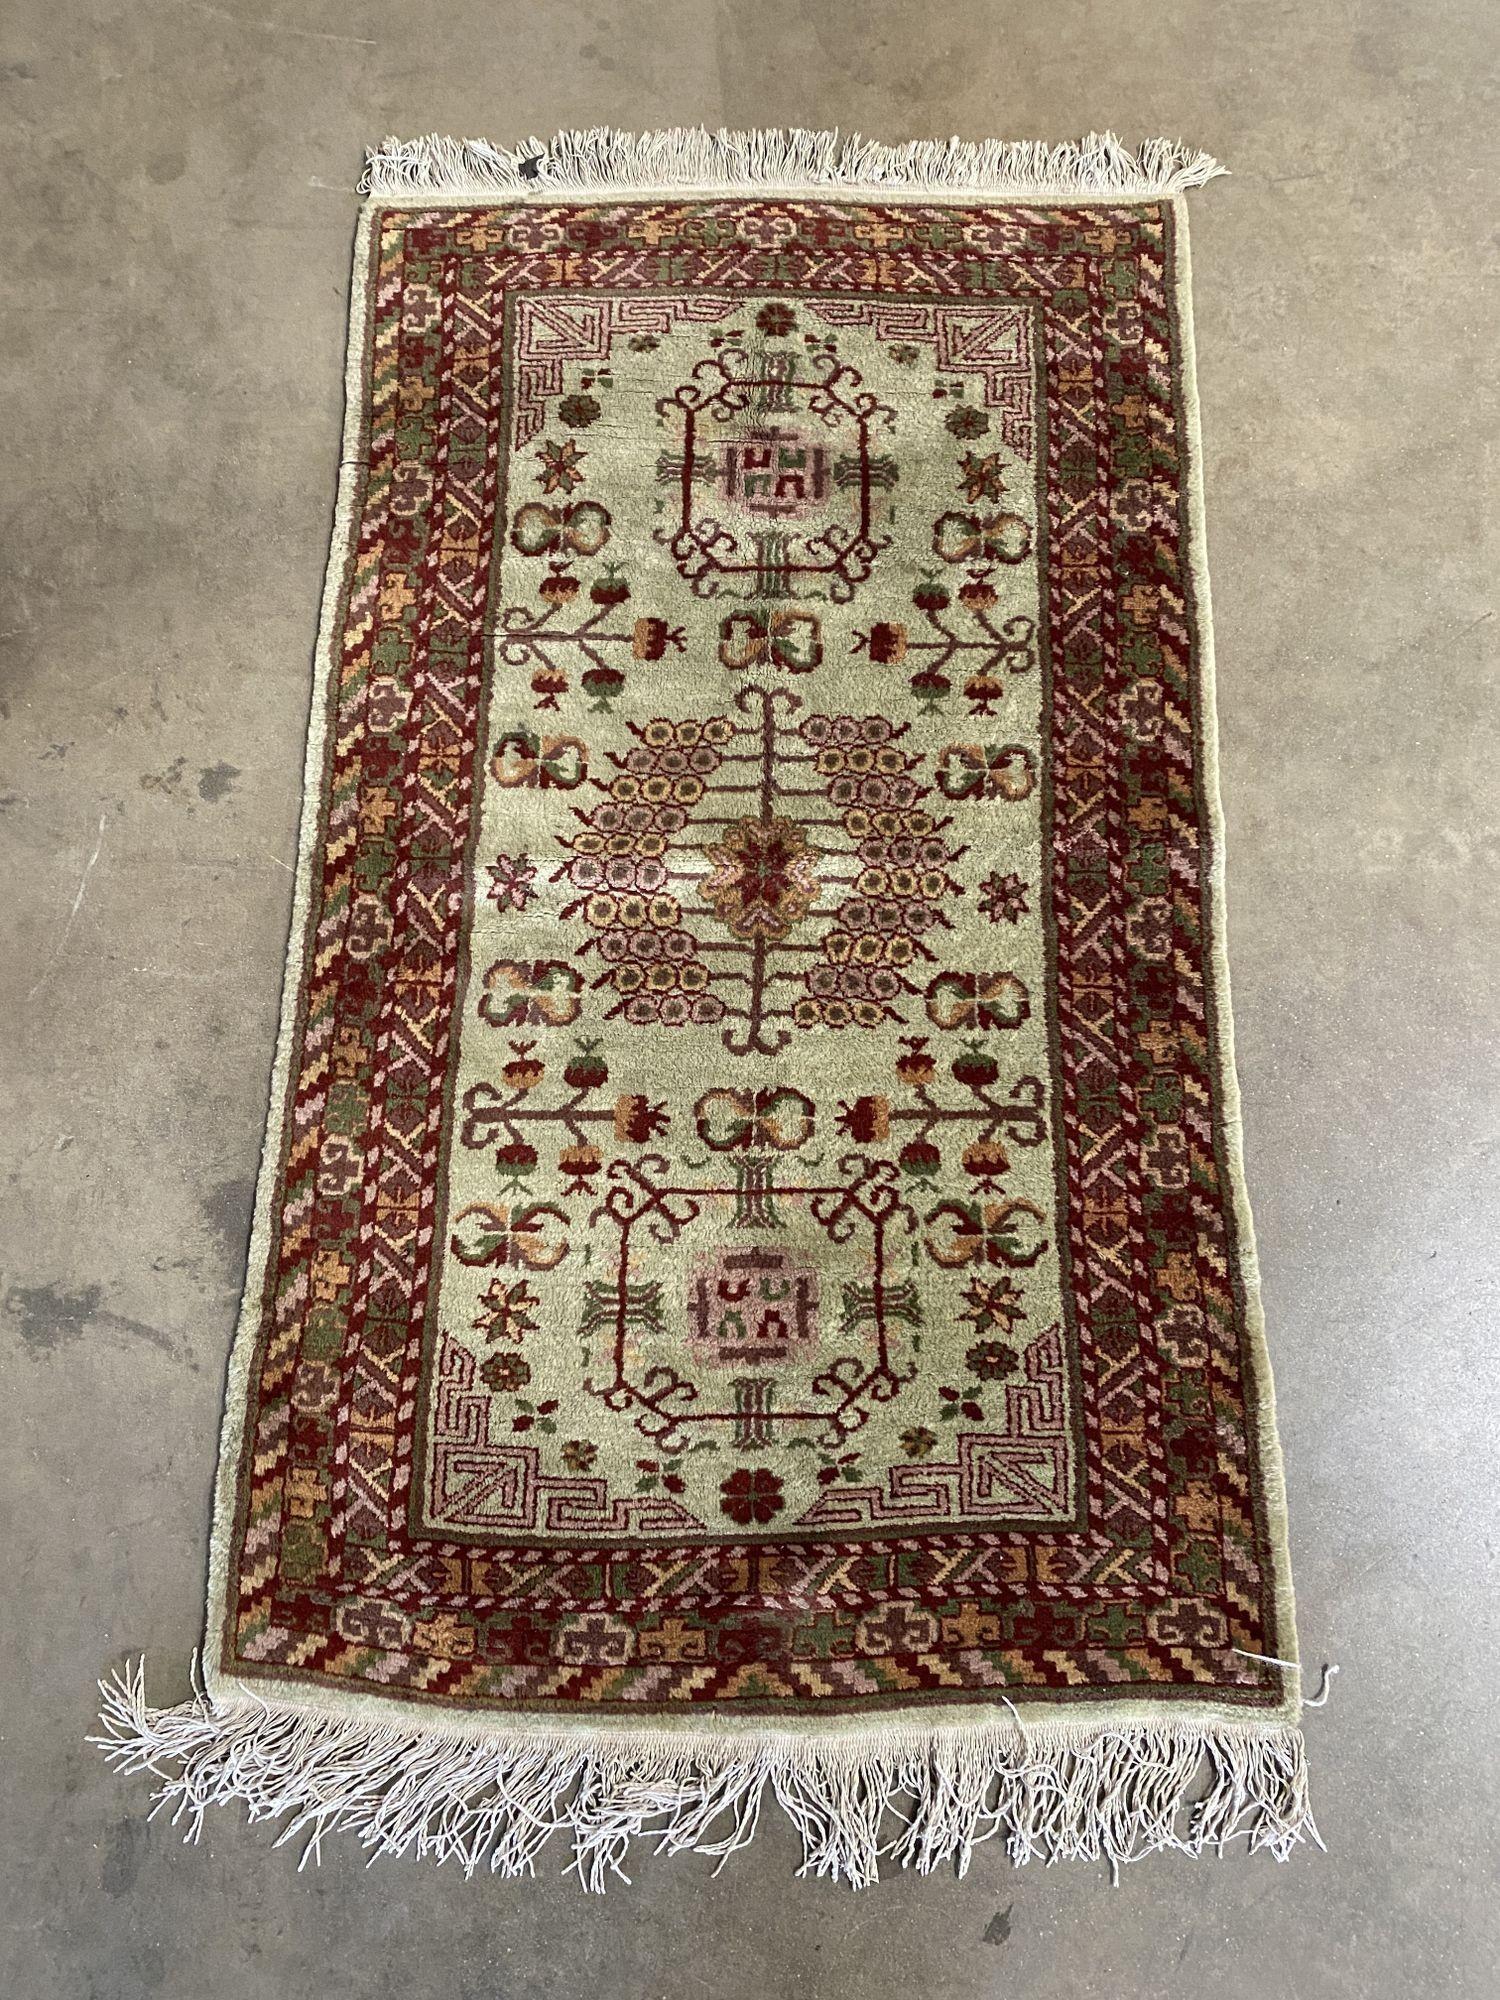 Nice Persian runner rug 1930s excellent shape for age a great addition to any fine home.